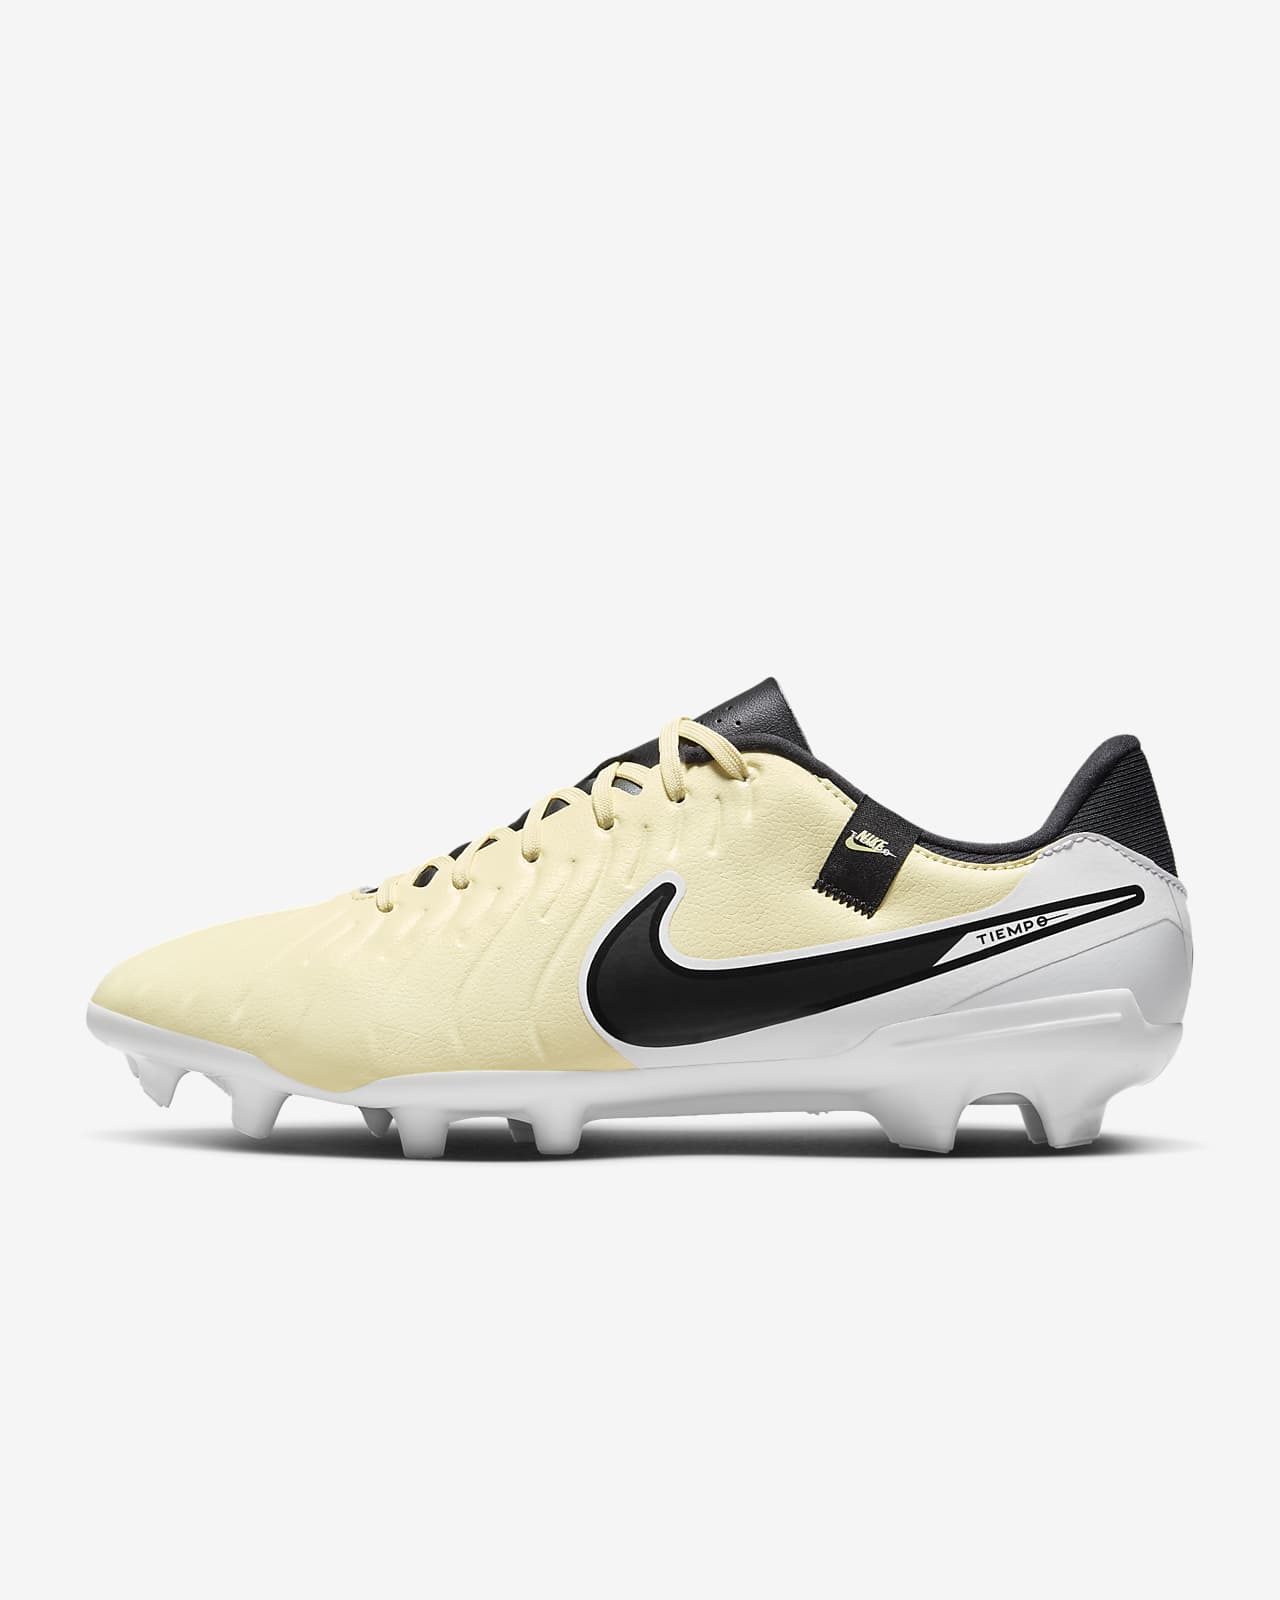 Academy Soccer Tiempo Low-Top 10 Multi-Ground Cleats. Nike Legend